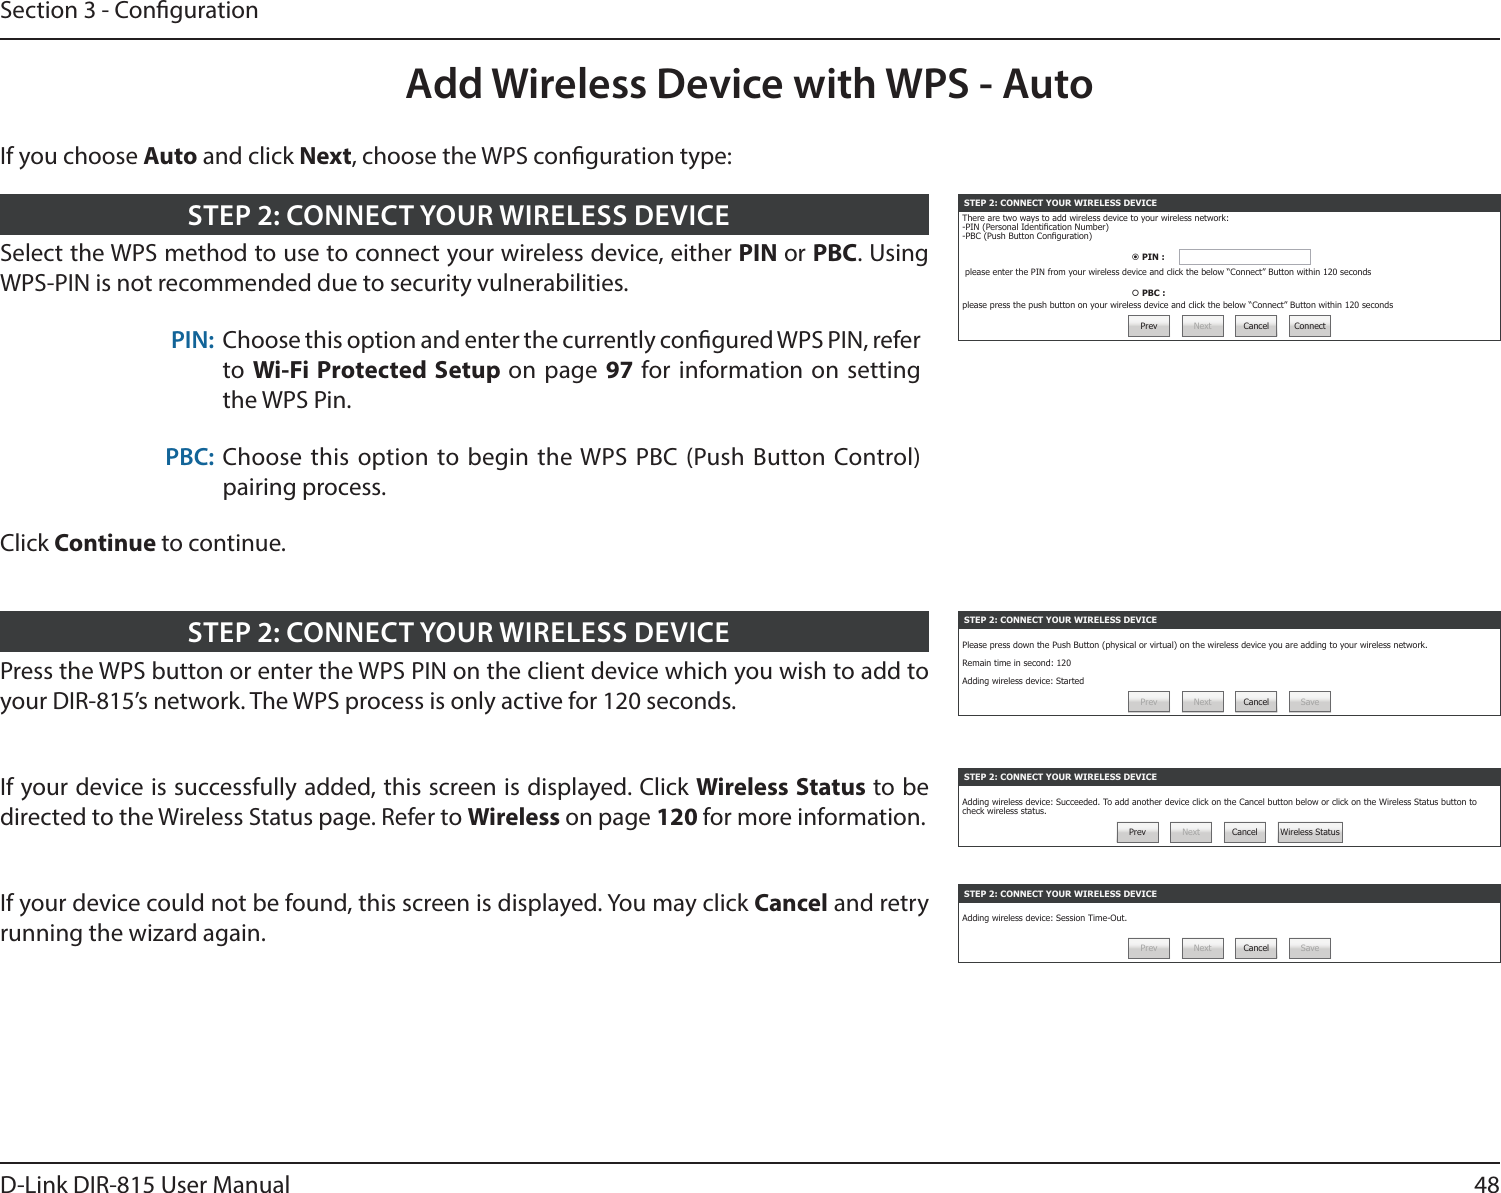 48D-Link DIR-815 User ManualSection 3 - CongurationAdd Wireless Device with WPS - AutoSTEP 2: CONNECT YOUR WIRELESS DEVICEThere are two ways to add wireless device to your wireless network:-PIN (Personal Identication Number)-PBC (Push Button Conguration) PIN :  please enter the PIN from your wireless device and click the below “Connect” Button within 120 seconds PBC : please press the push button on your wireless device and click the below “Connect” Button within 120 secondsPrev Next Cancel ConnectSelect the WPS method to use to connect your wireless device, either PIN or PBC. Using WPS-PIN is not recommended due to security vulnerabilities.PIN: Choose this option and enter the currently congured WPS PIN, refer to Wi-Fi Protected Setup on page 97 for information on setting the WPS Pin.PBC: Choose this option to begin the WPS PBC (Push Button Control)pairing process.Click Continue to continue.STEP 2: CONNECT YOUR WIRELESS DEVICESTEP 2: CONNECT YOUR WIRELESS DEVICEPlease press down the Push Button (physical or virtual) on the wireless device you are adding to your wireless network.Remain time in second: 120Adding wireless device: StartedPrev Next Cancel SavePress the WPS button or enter the WPS PIN on the client device which you wish to add to your DIR-815’s network. The WPS process is only active for 120 seconds.STEP 2: CONNECT YOUR WIRELESS DEVICESTEP 2: CONNECT YOUR WIRELESS DEVICEAdding wireless device: Session Time-Out.Prev Next Cancel SaveSTEP 2: CONNECT YOUR WIRELESS DEVICEAdding wireless device: Succeeded. To add another device click on the Cancel button below or click on the Wireless Status button to check wireless status.Prev Next Cancel Wireless StatusIf your device is successfully added, this screen is displayed. Click Wireless Status to be directed to the Wireless Status page. Refer to Wireless on page 120 for more information.If your device could not be found, this screen is displayed. You may click Cancel and retry running the wizard again.If you choose Auto and click Next, choose the WPS conguration type: